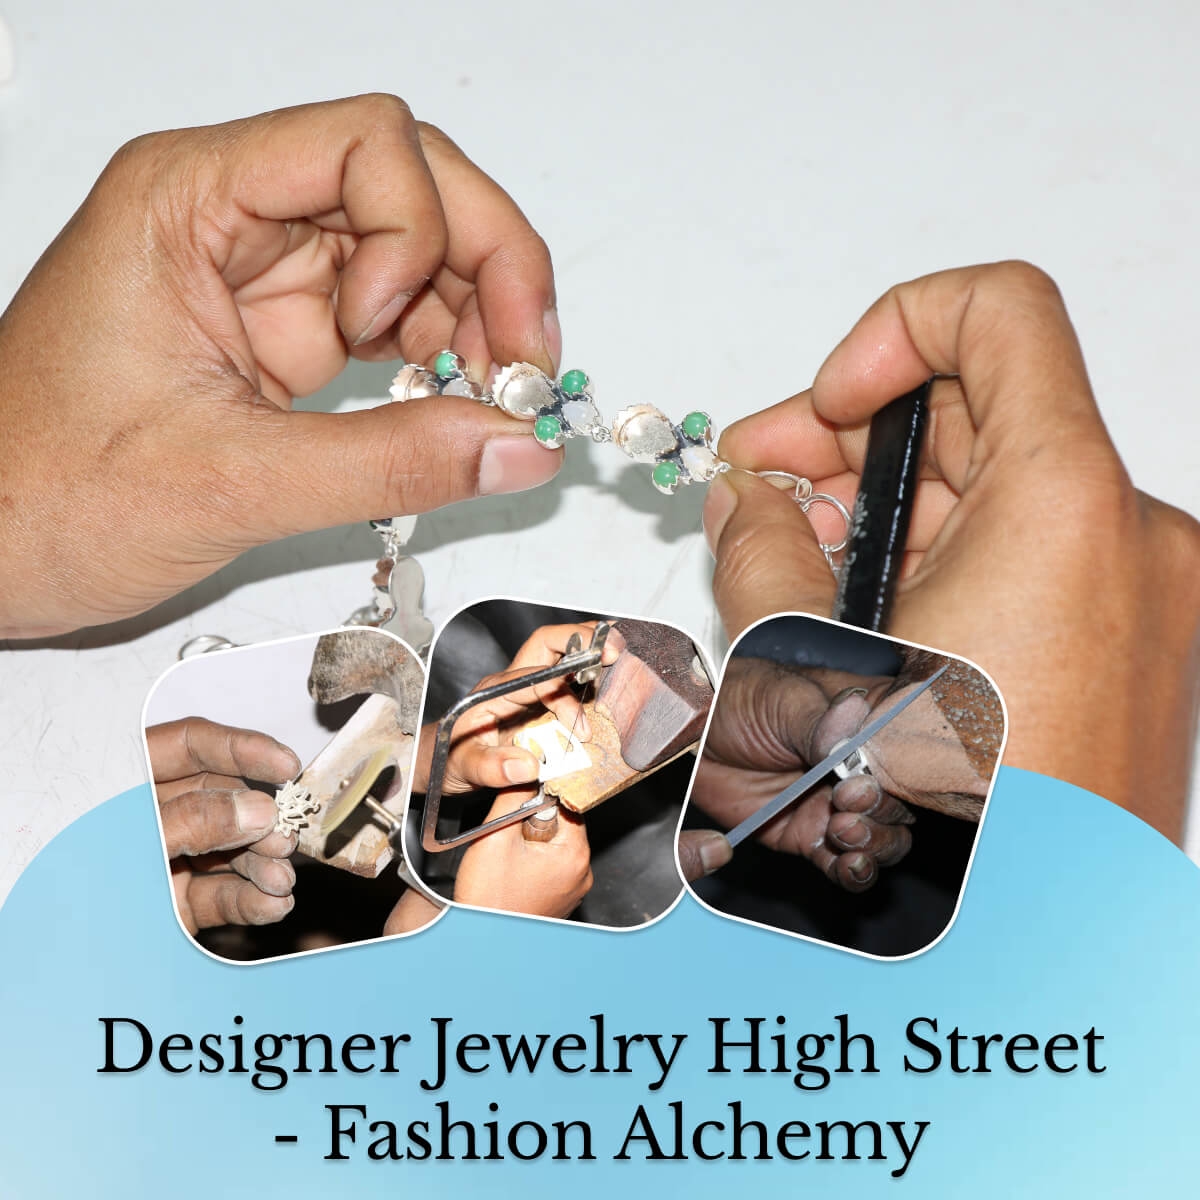 Mixing Designer Jewelry with High Street Fashion to create a signature look